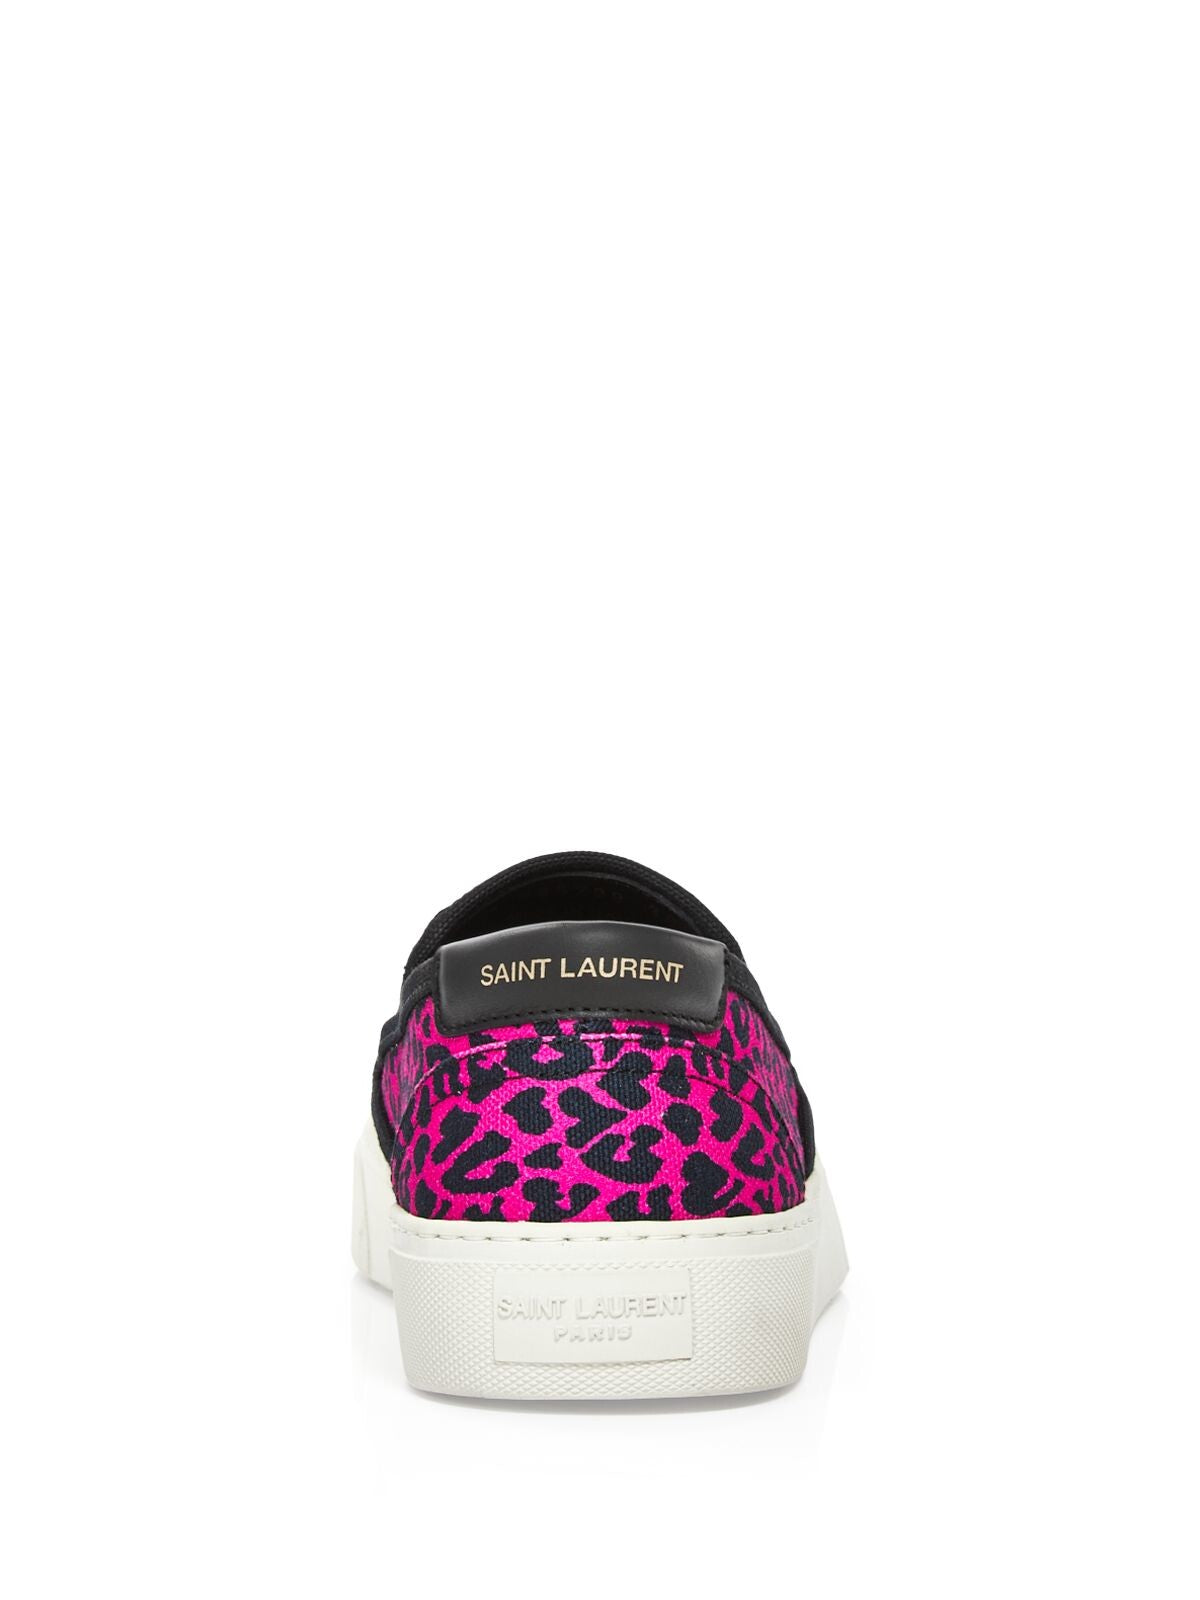 SAINT LAURENT Womens Fuxia Black Pink Abstract Print Logo At Back Padded Paris  Venice Slip On Leather Athletic Sneakers Shoes 39.5